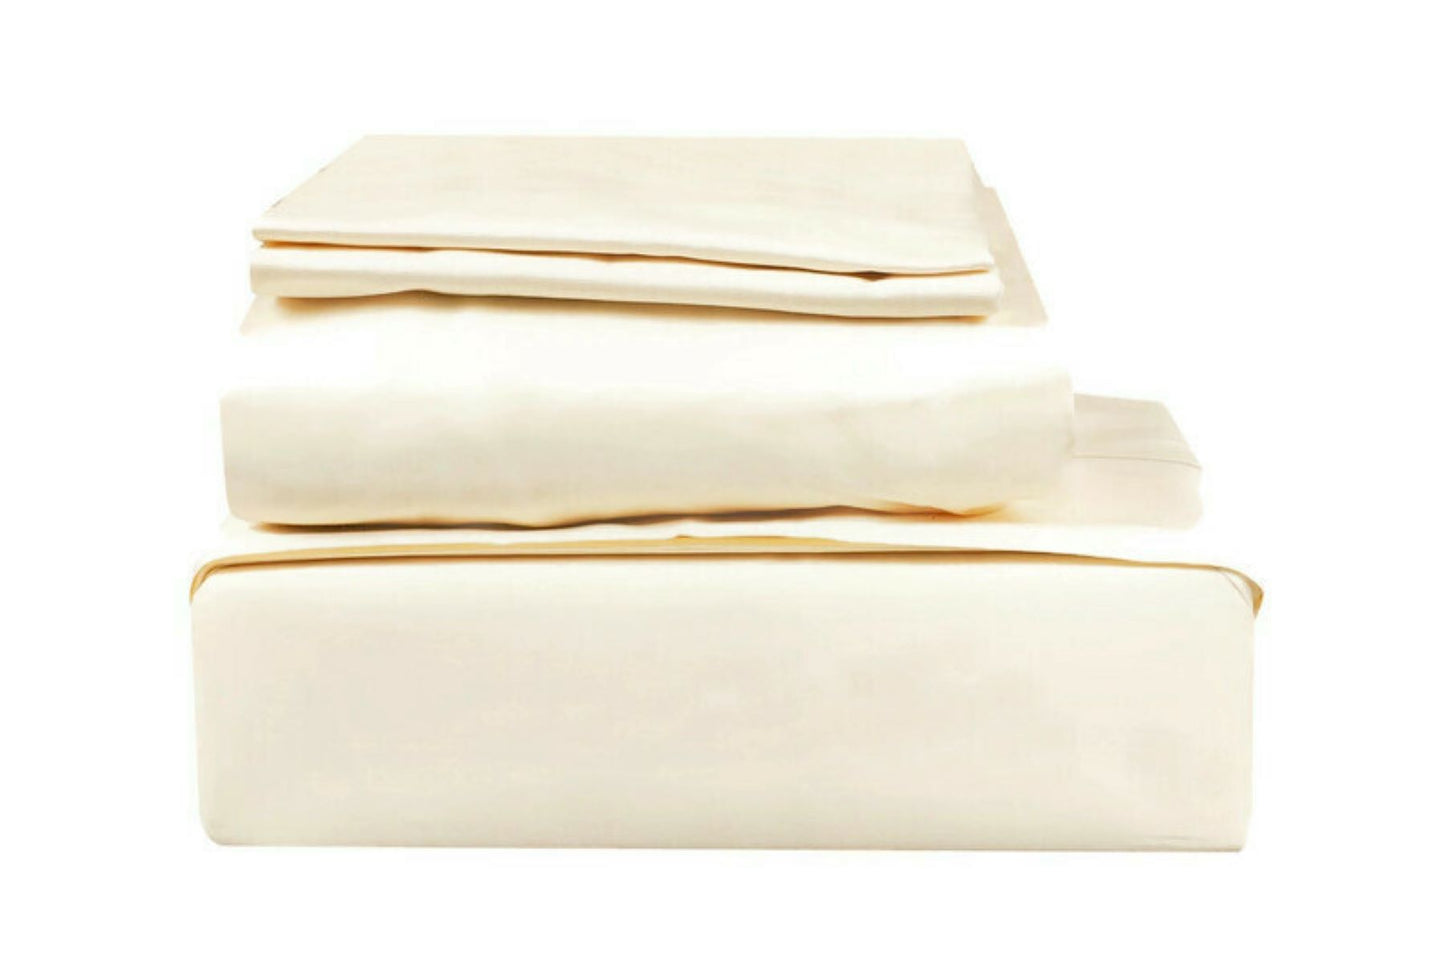 400 TC SOLID,100% COTTON SATEEN, 4 PC BED SHEET SET